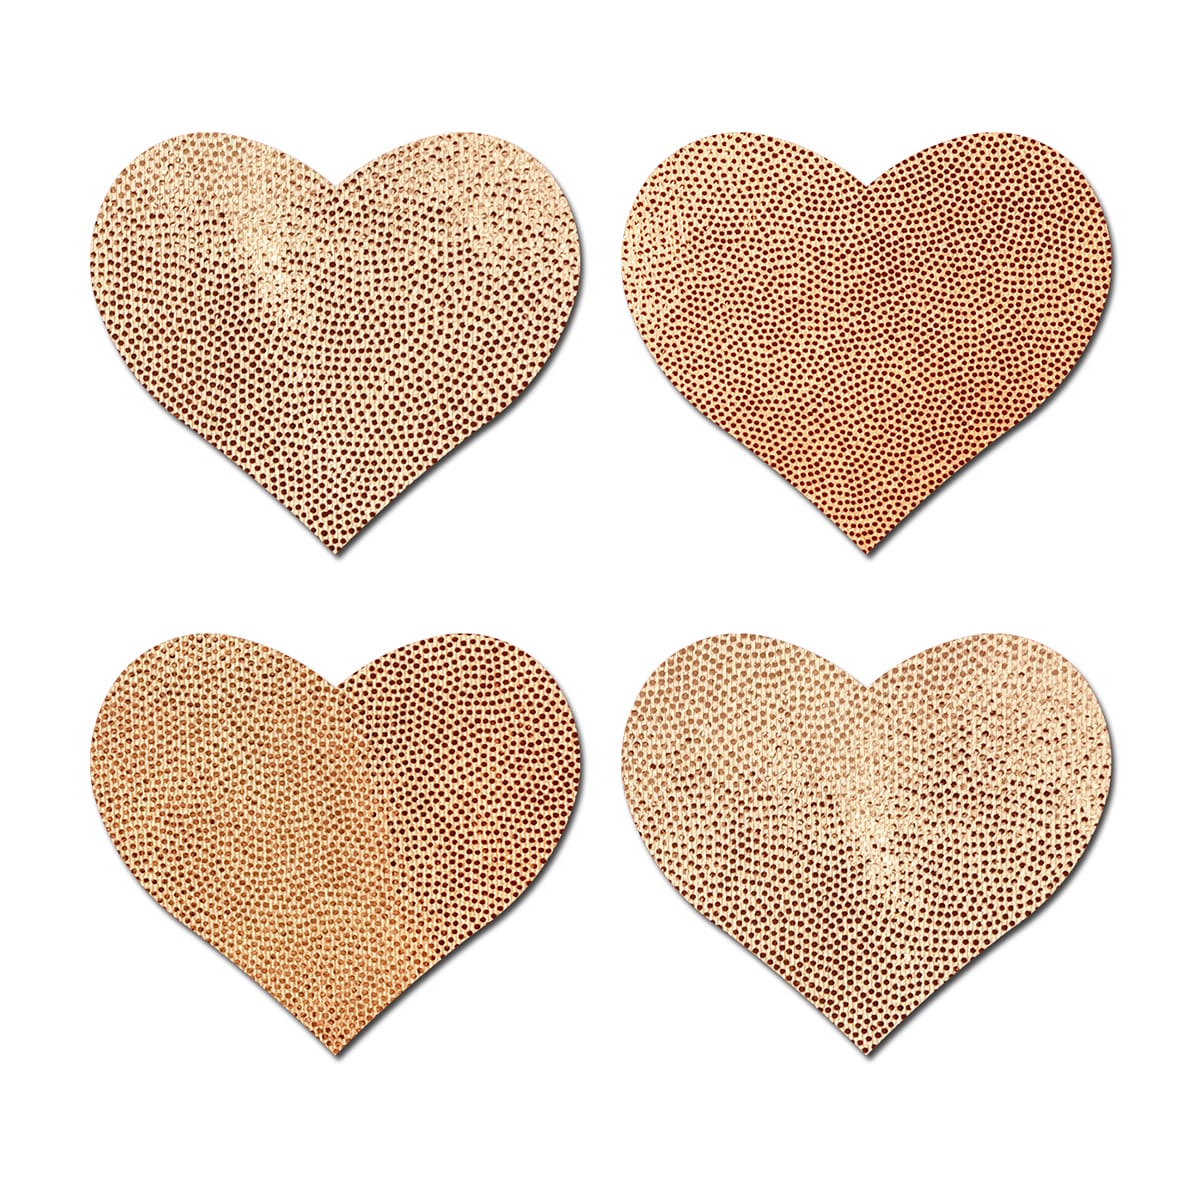 Wear Pastease Petite Hearts 4pc - Rose Gold nipple covers.